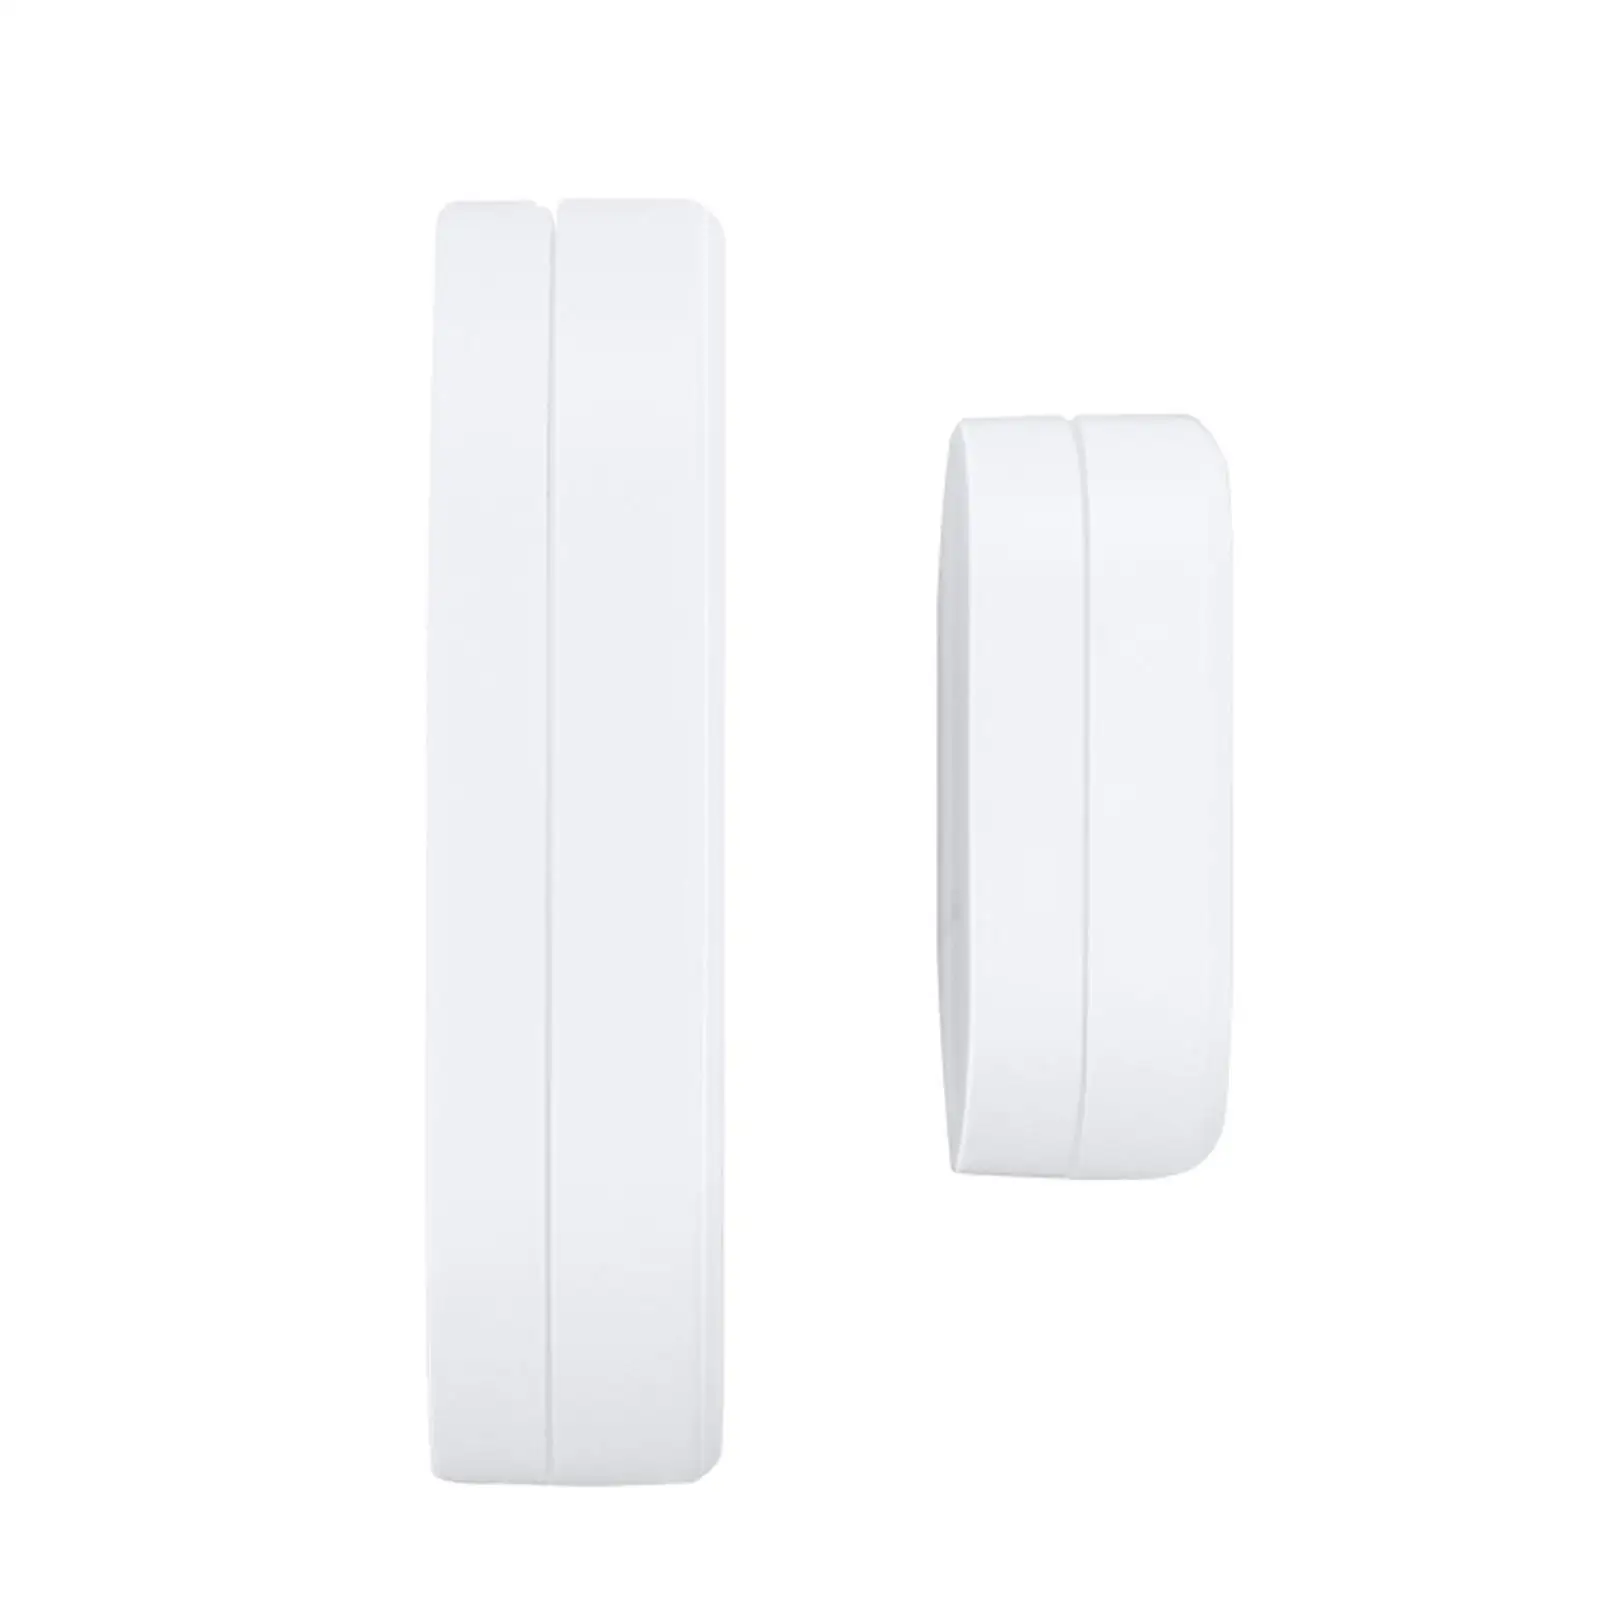 Door and Window Sensor Easy to Install Wireless Connection Door Magnetic for Garage Office Home Safety Children